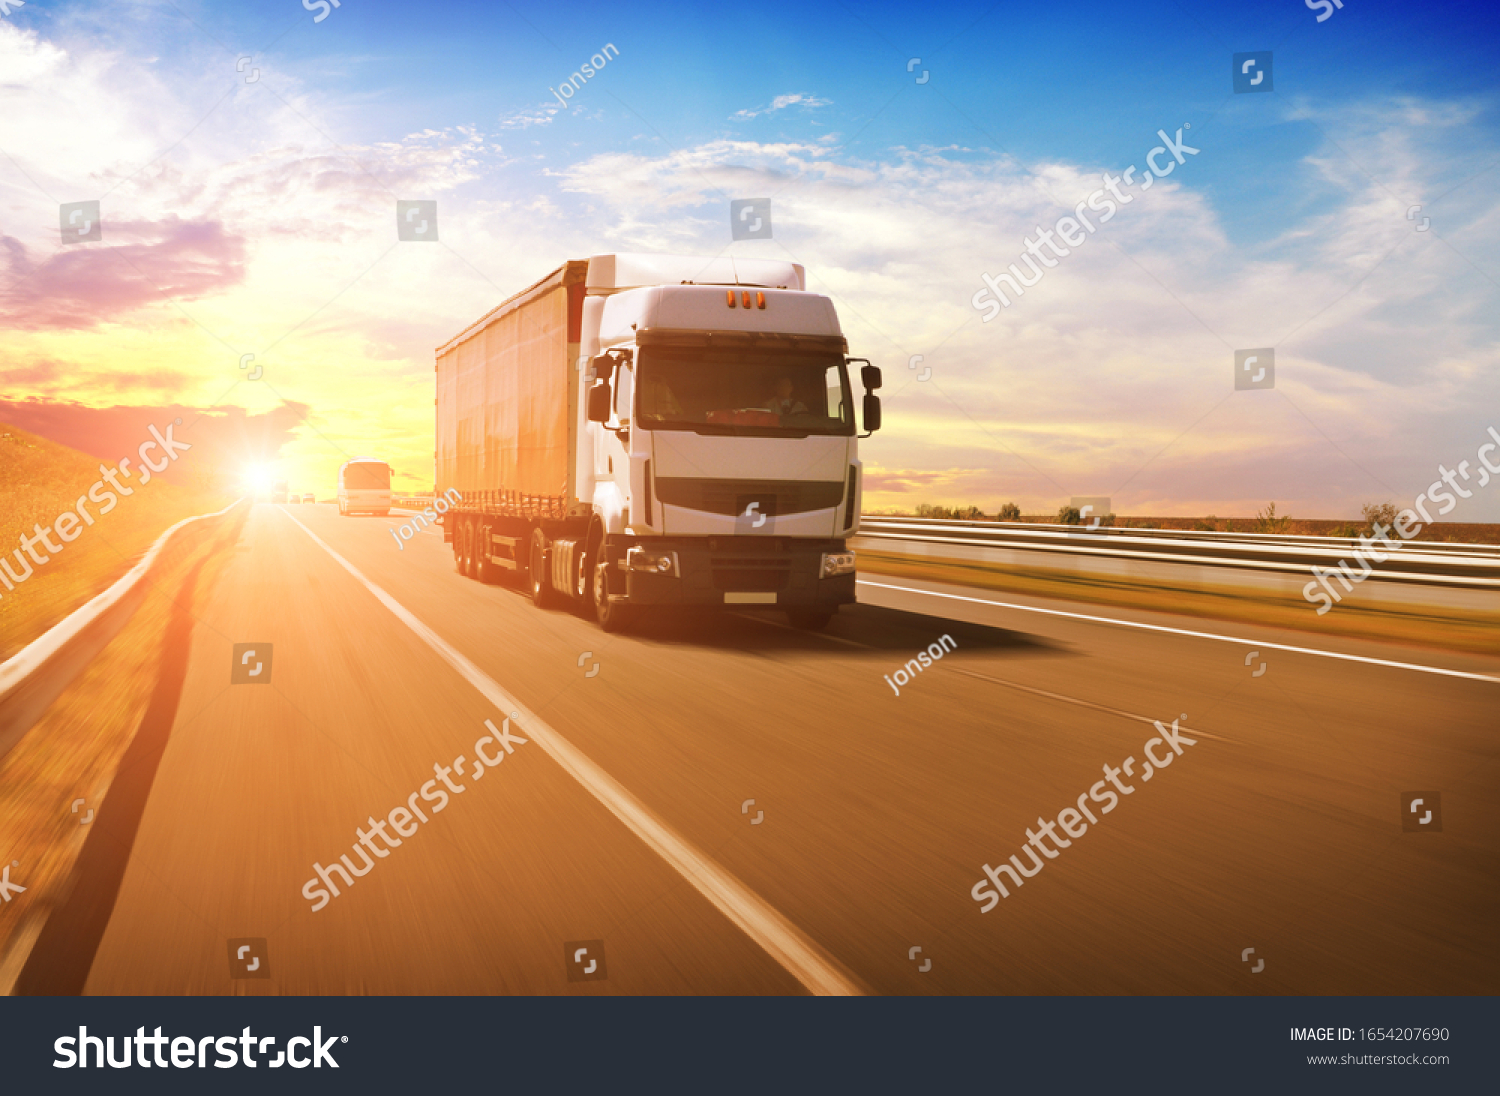 A big white truck with a red trailer and other cars on the countryside road in motion against a night sky with a sunset #1654207690